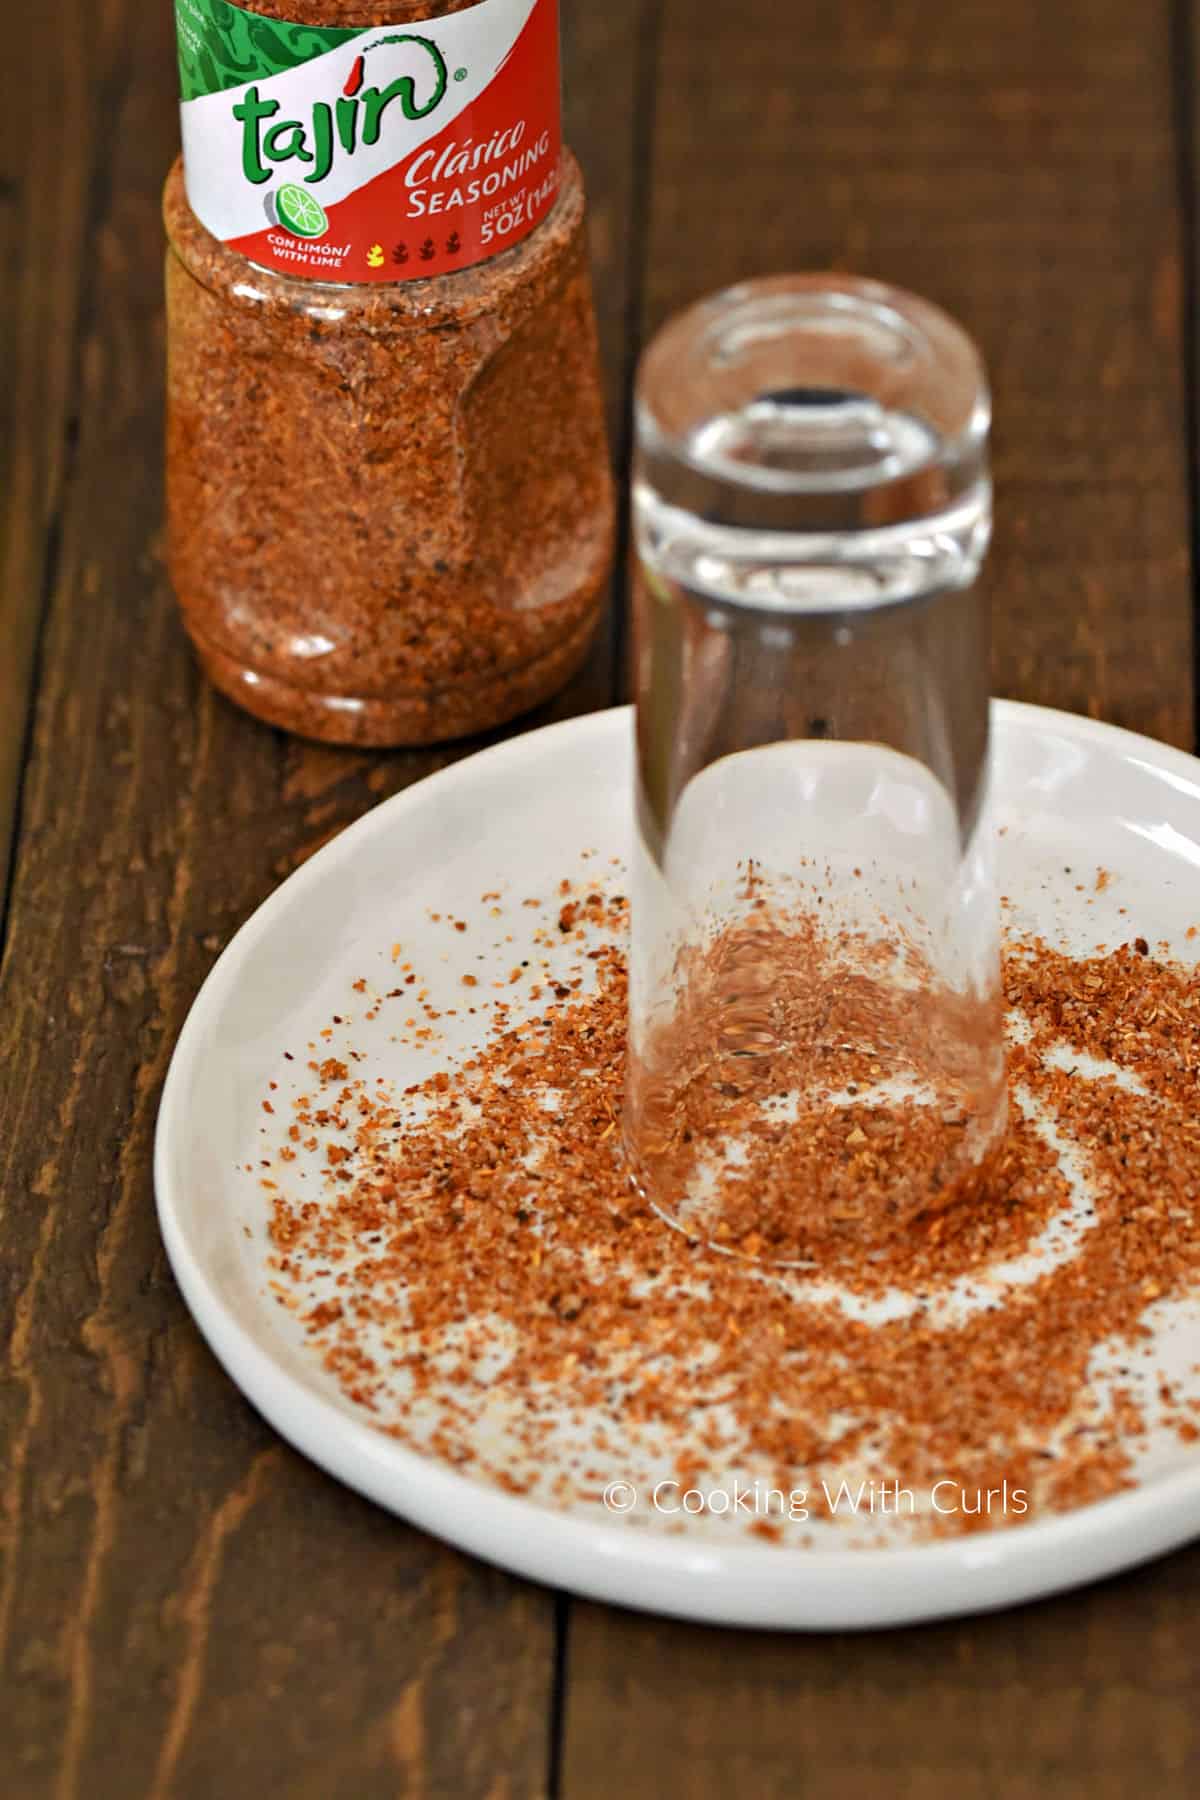 A small plate with chili spice mixture and rim-side down shot glass. 